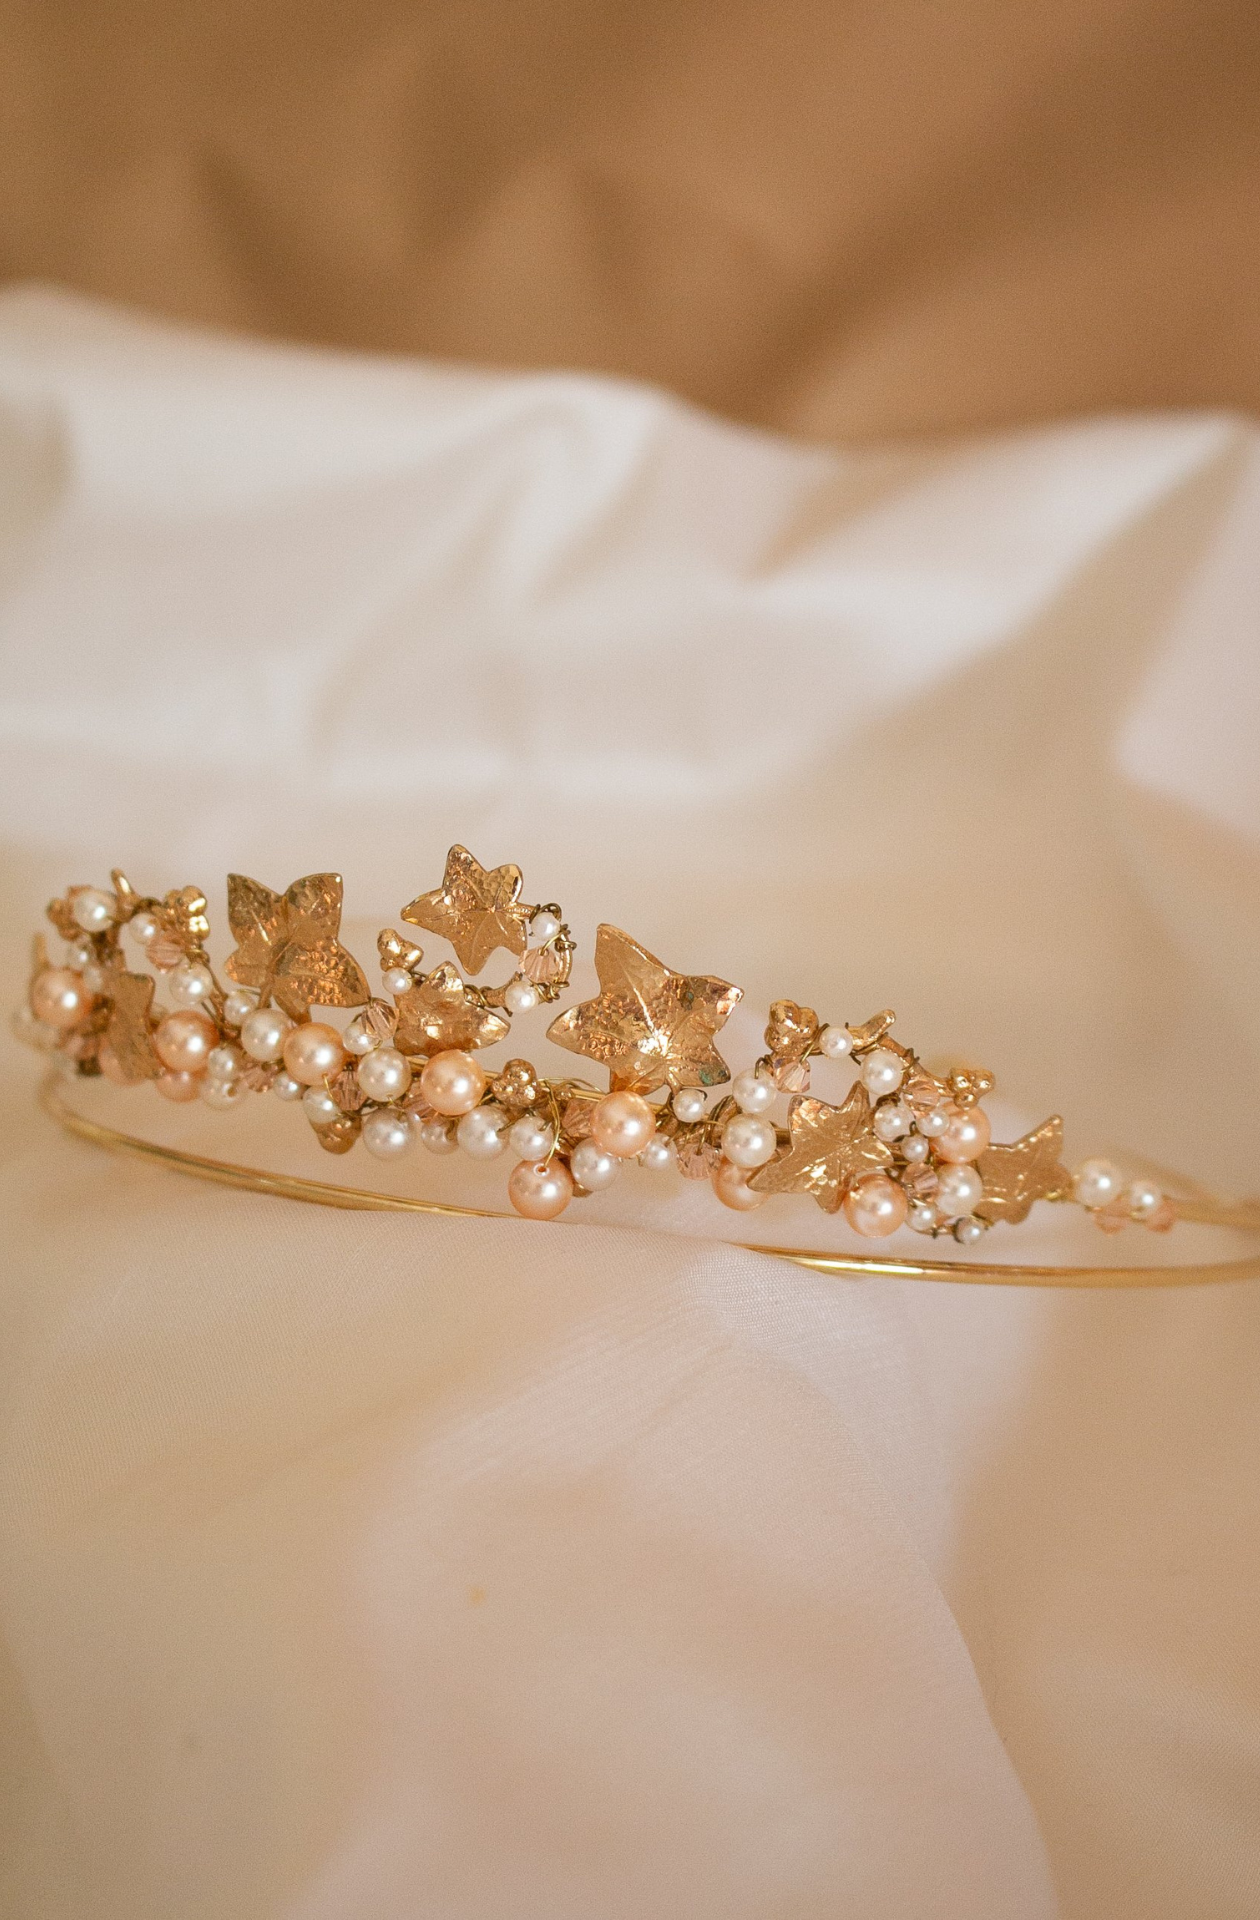 A close up of A handmade Swarovski white Pearl and Crystal Headpiece. A circular gold band holding the gems between a variety of floral and leaf metal shapes